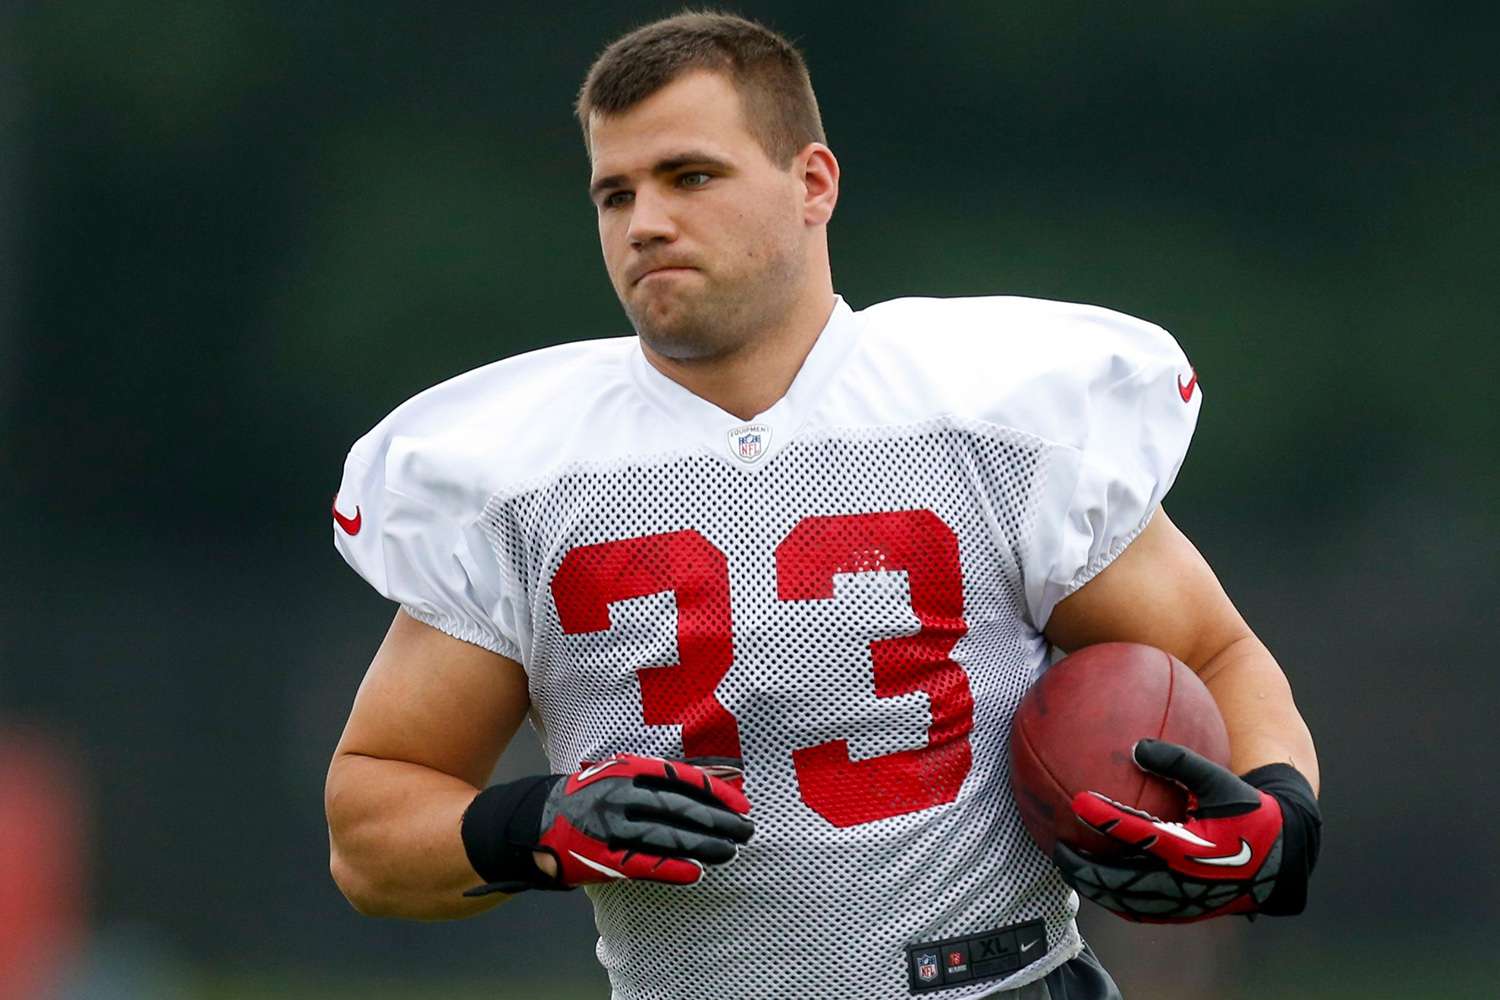 Former NFL Star Peyton Hillis in ICU After Saving His Children from Drowning